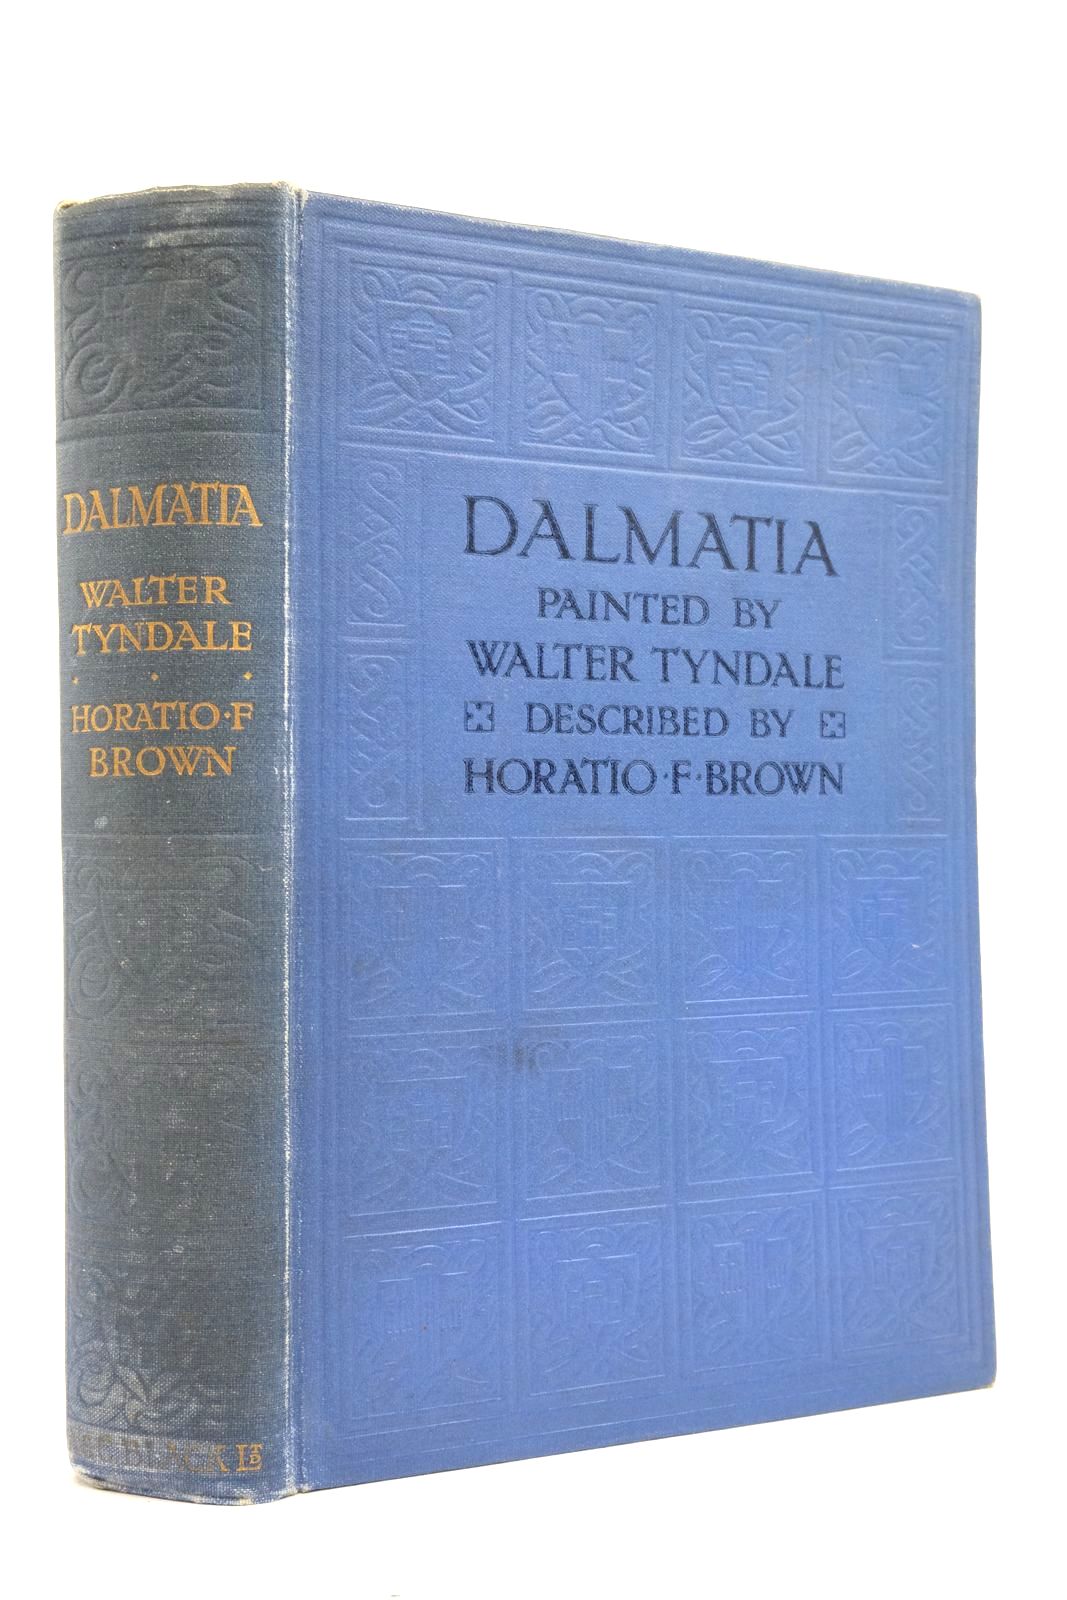 Photo of DALMATIA written by Brown, Horatio F. illustrated by Tyndale, Walter published by A. &amp; C. Black Ltd. (STOCK CODE: 2137201)  for sale by Stella & Rose's Books